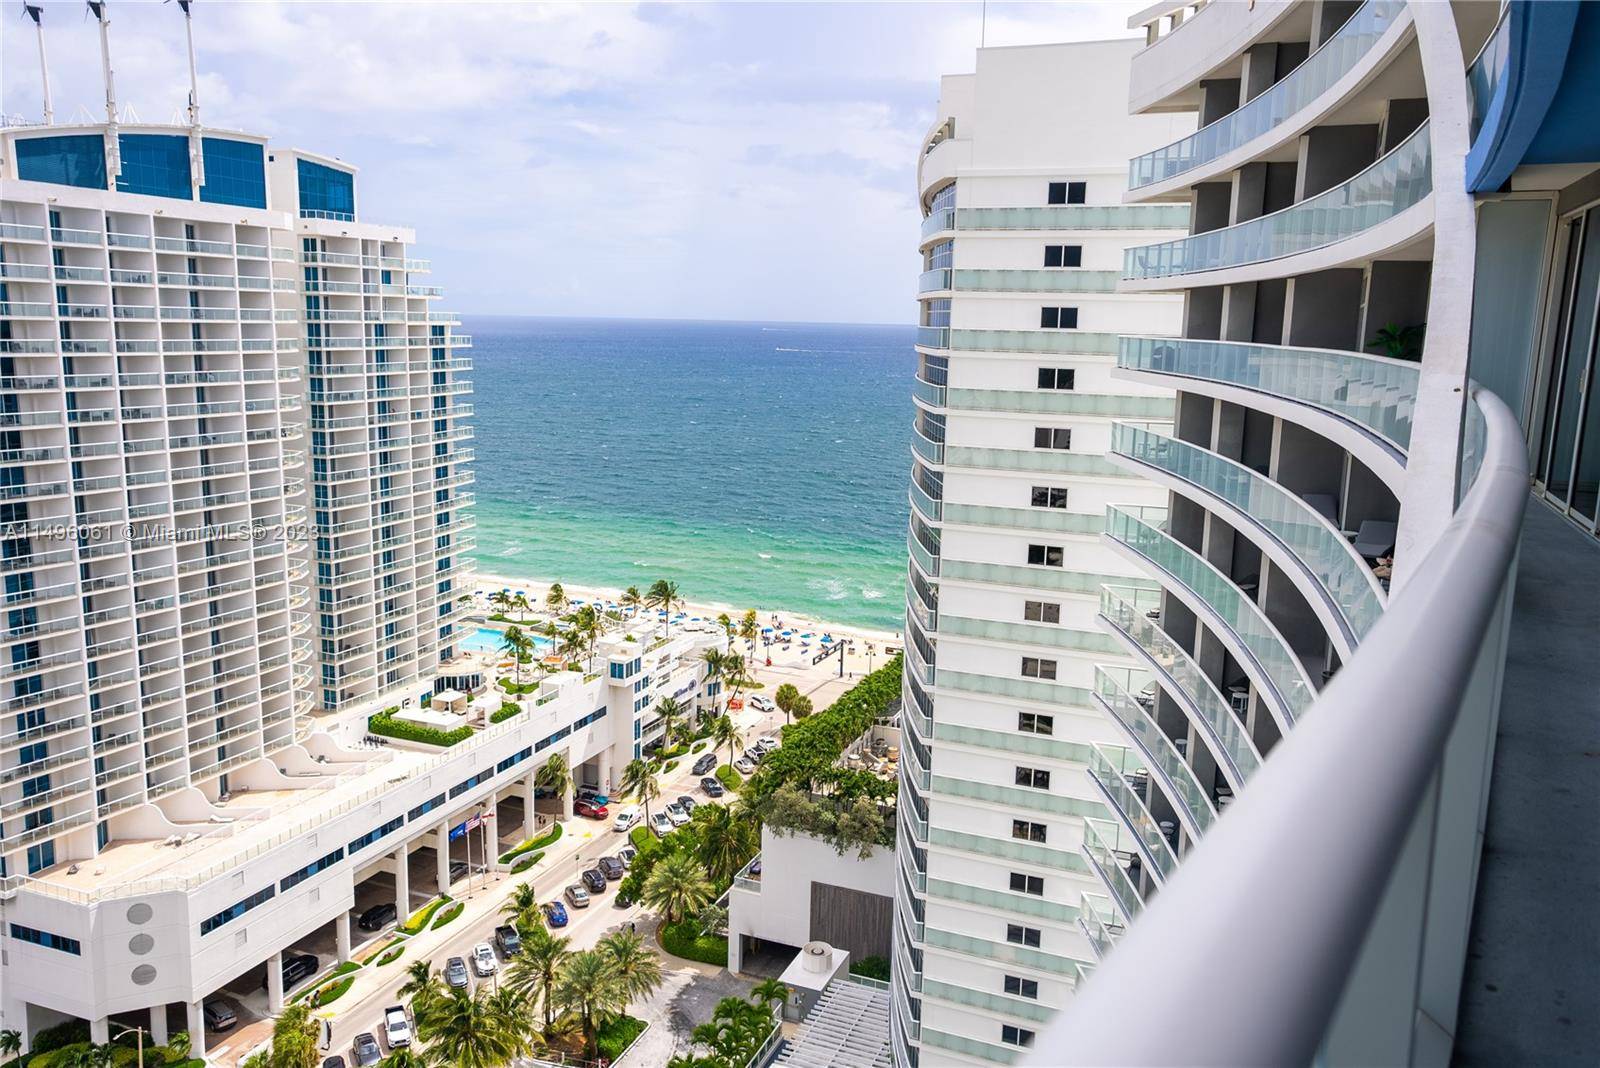 W HOTEL DECEMBER THROUGH MAY Amazing 2 Bedroom, 2 Bath fully furnished turnkey condo on the 22nd floor with beautiful ocean views at the Oceanfront W Residences on Ft Lauderdale ...